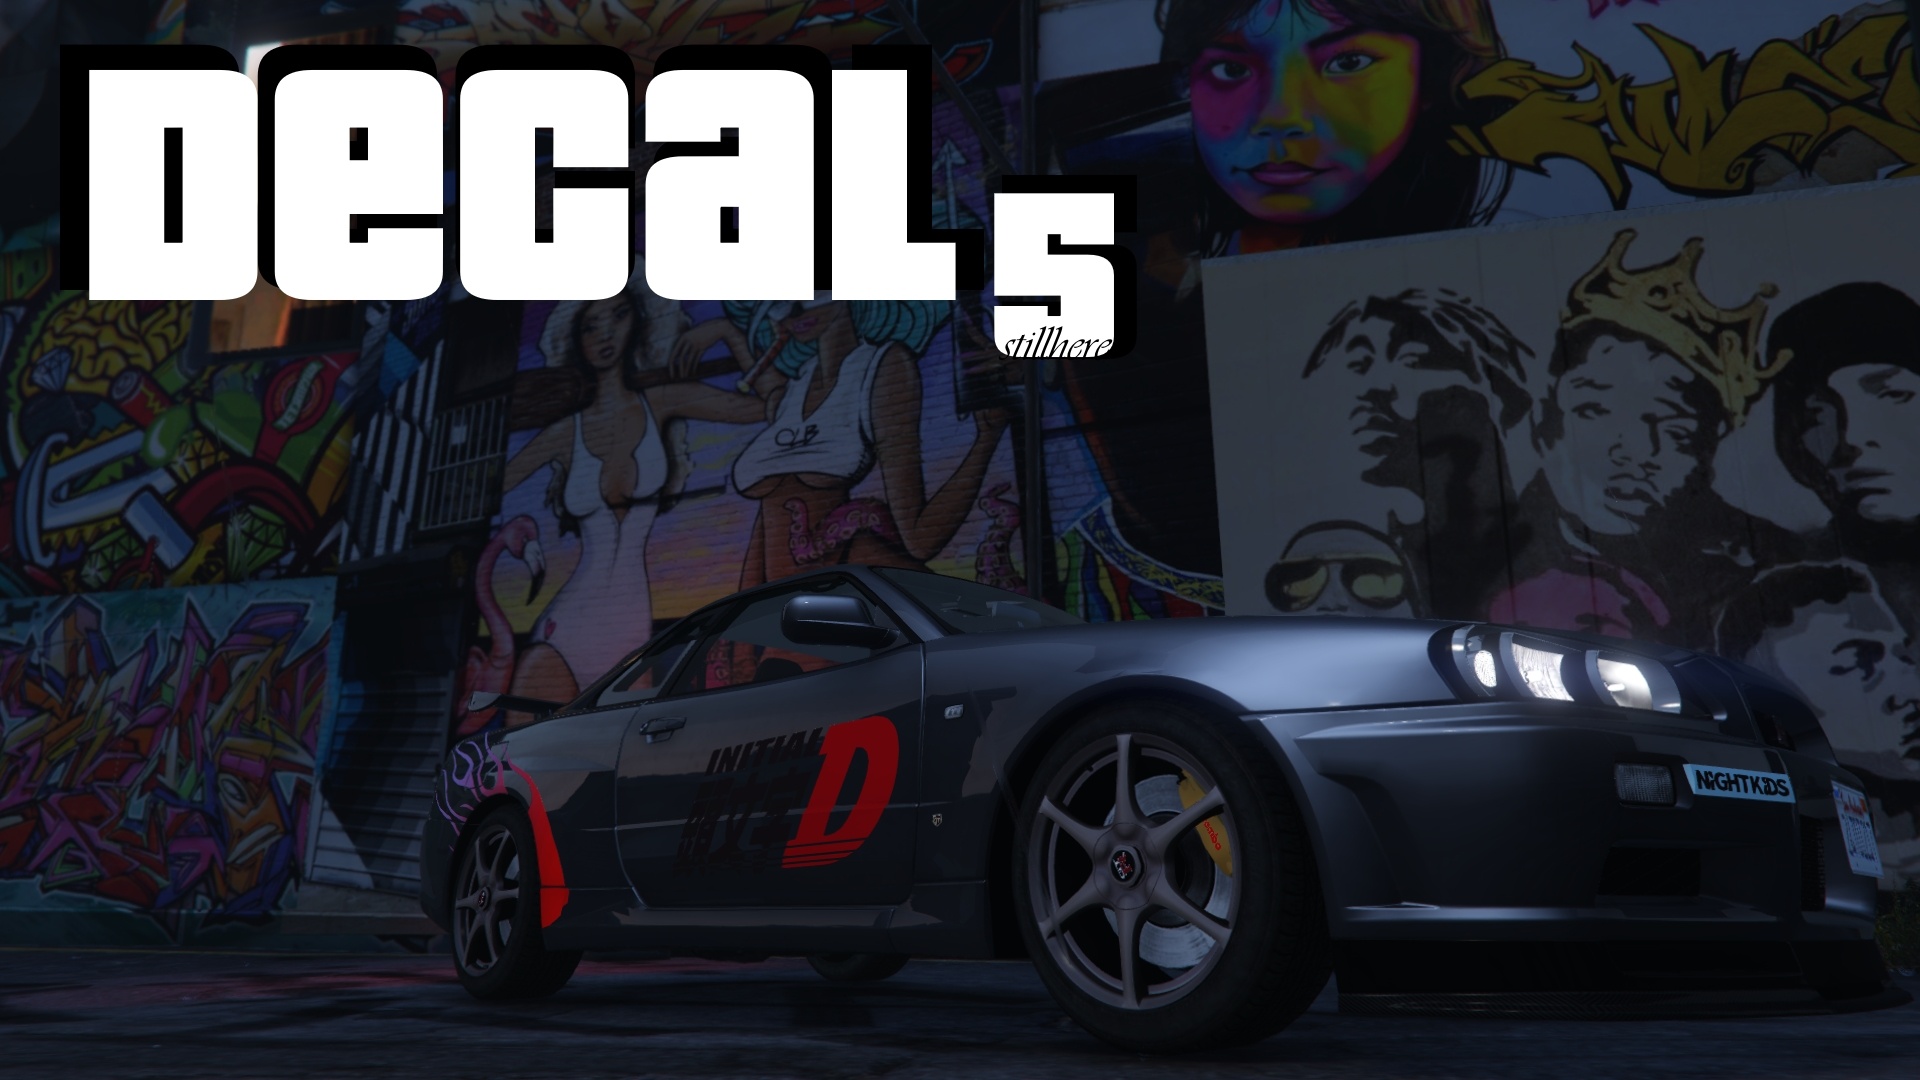 Gta 5 blood and decals фото 31